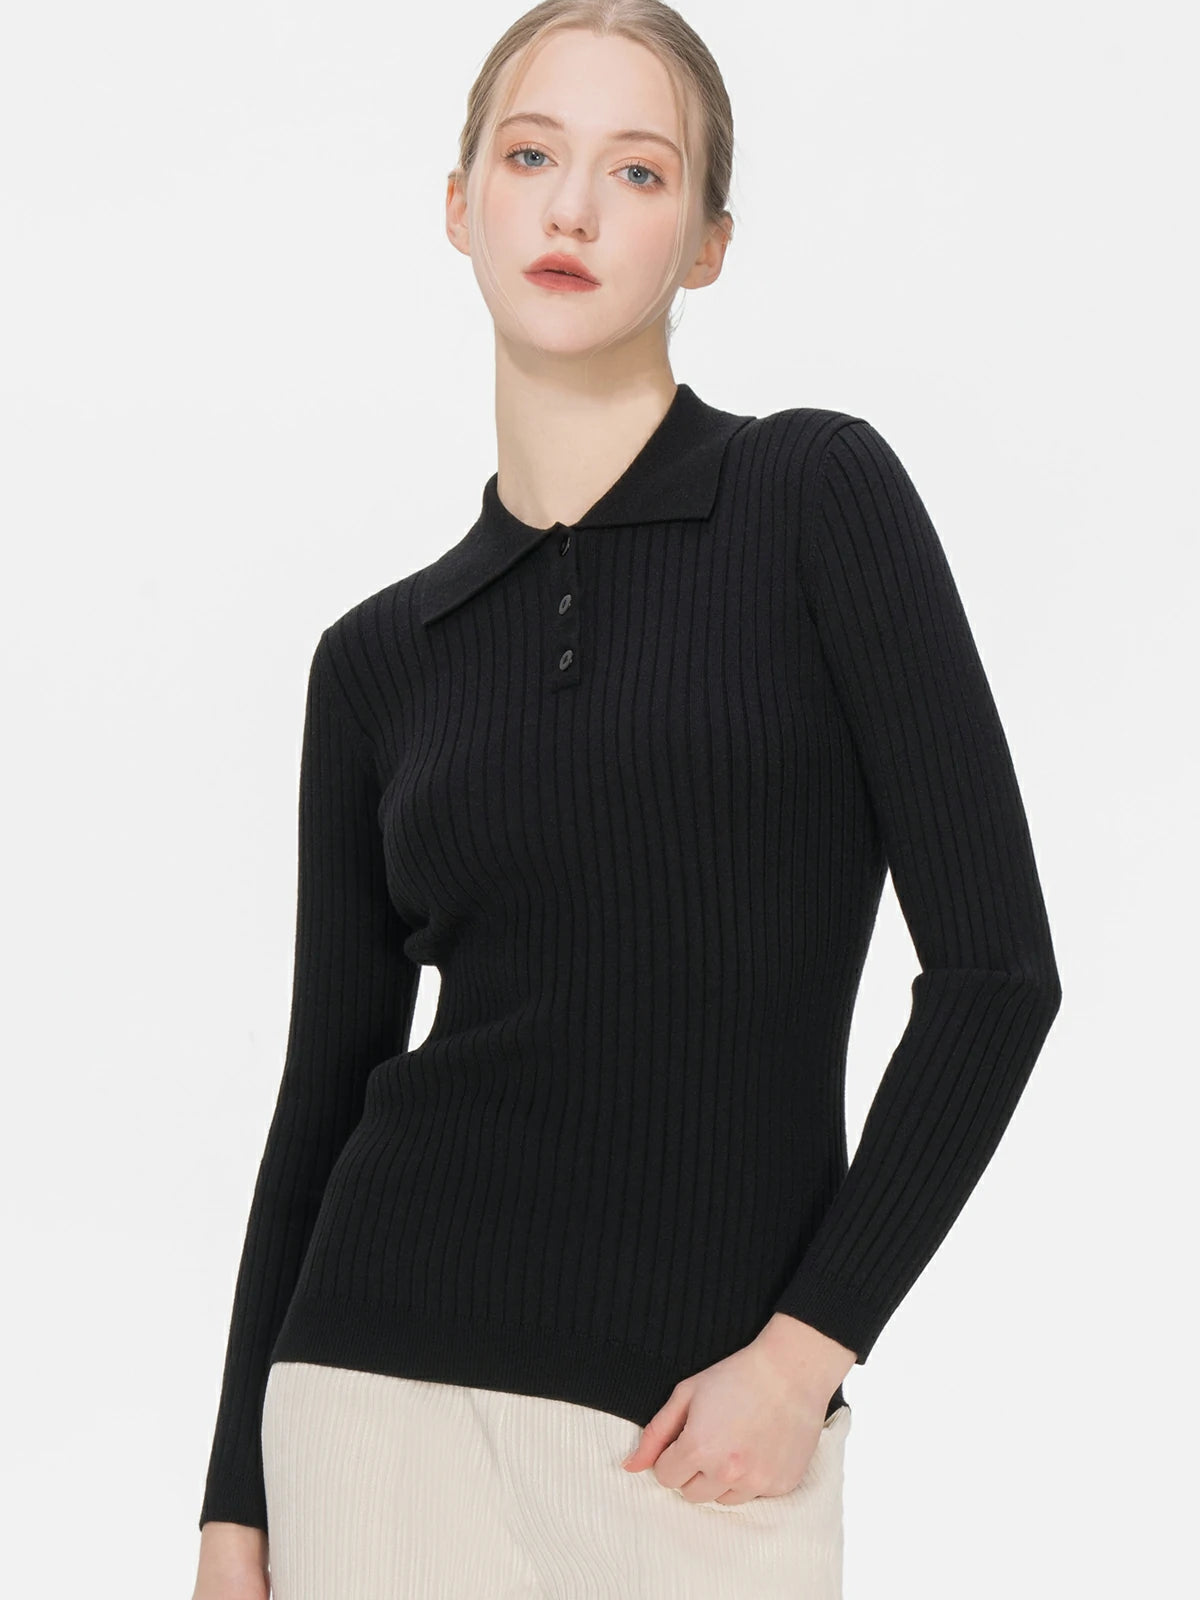 Make a statement in this stylish black knitwear, boasting a polo collar, buttoned detailing, and a slim fit, offering both sophistication and comfort.